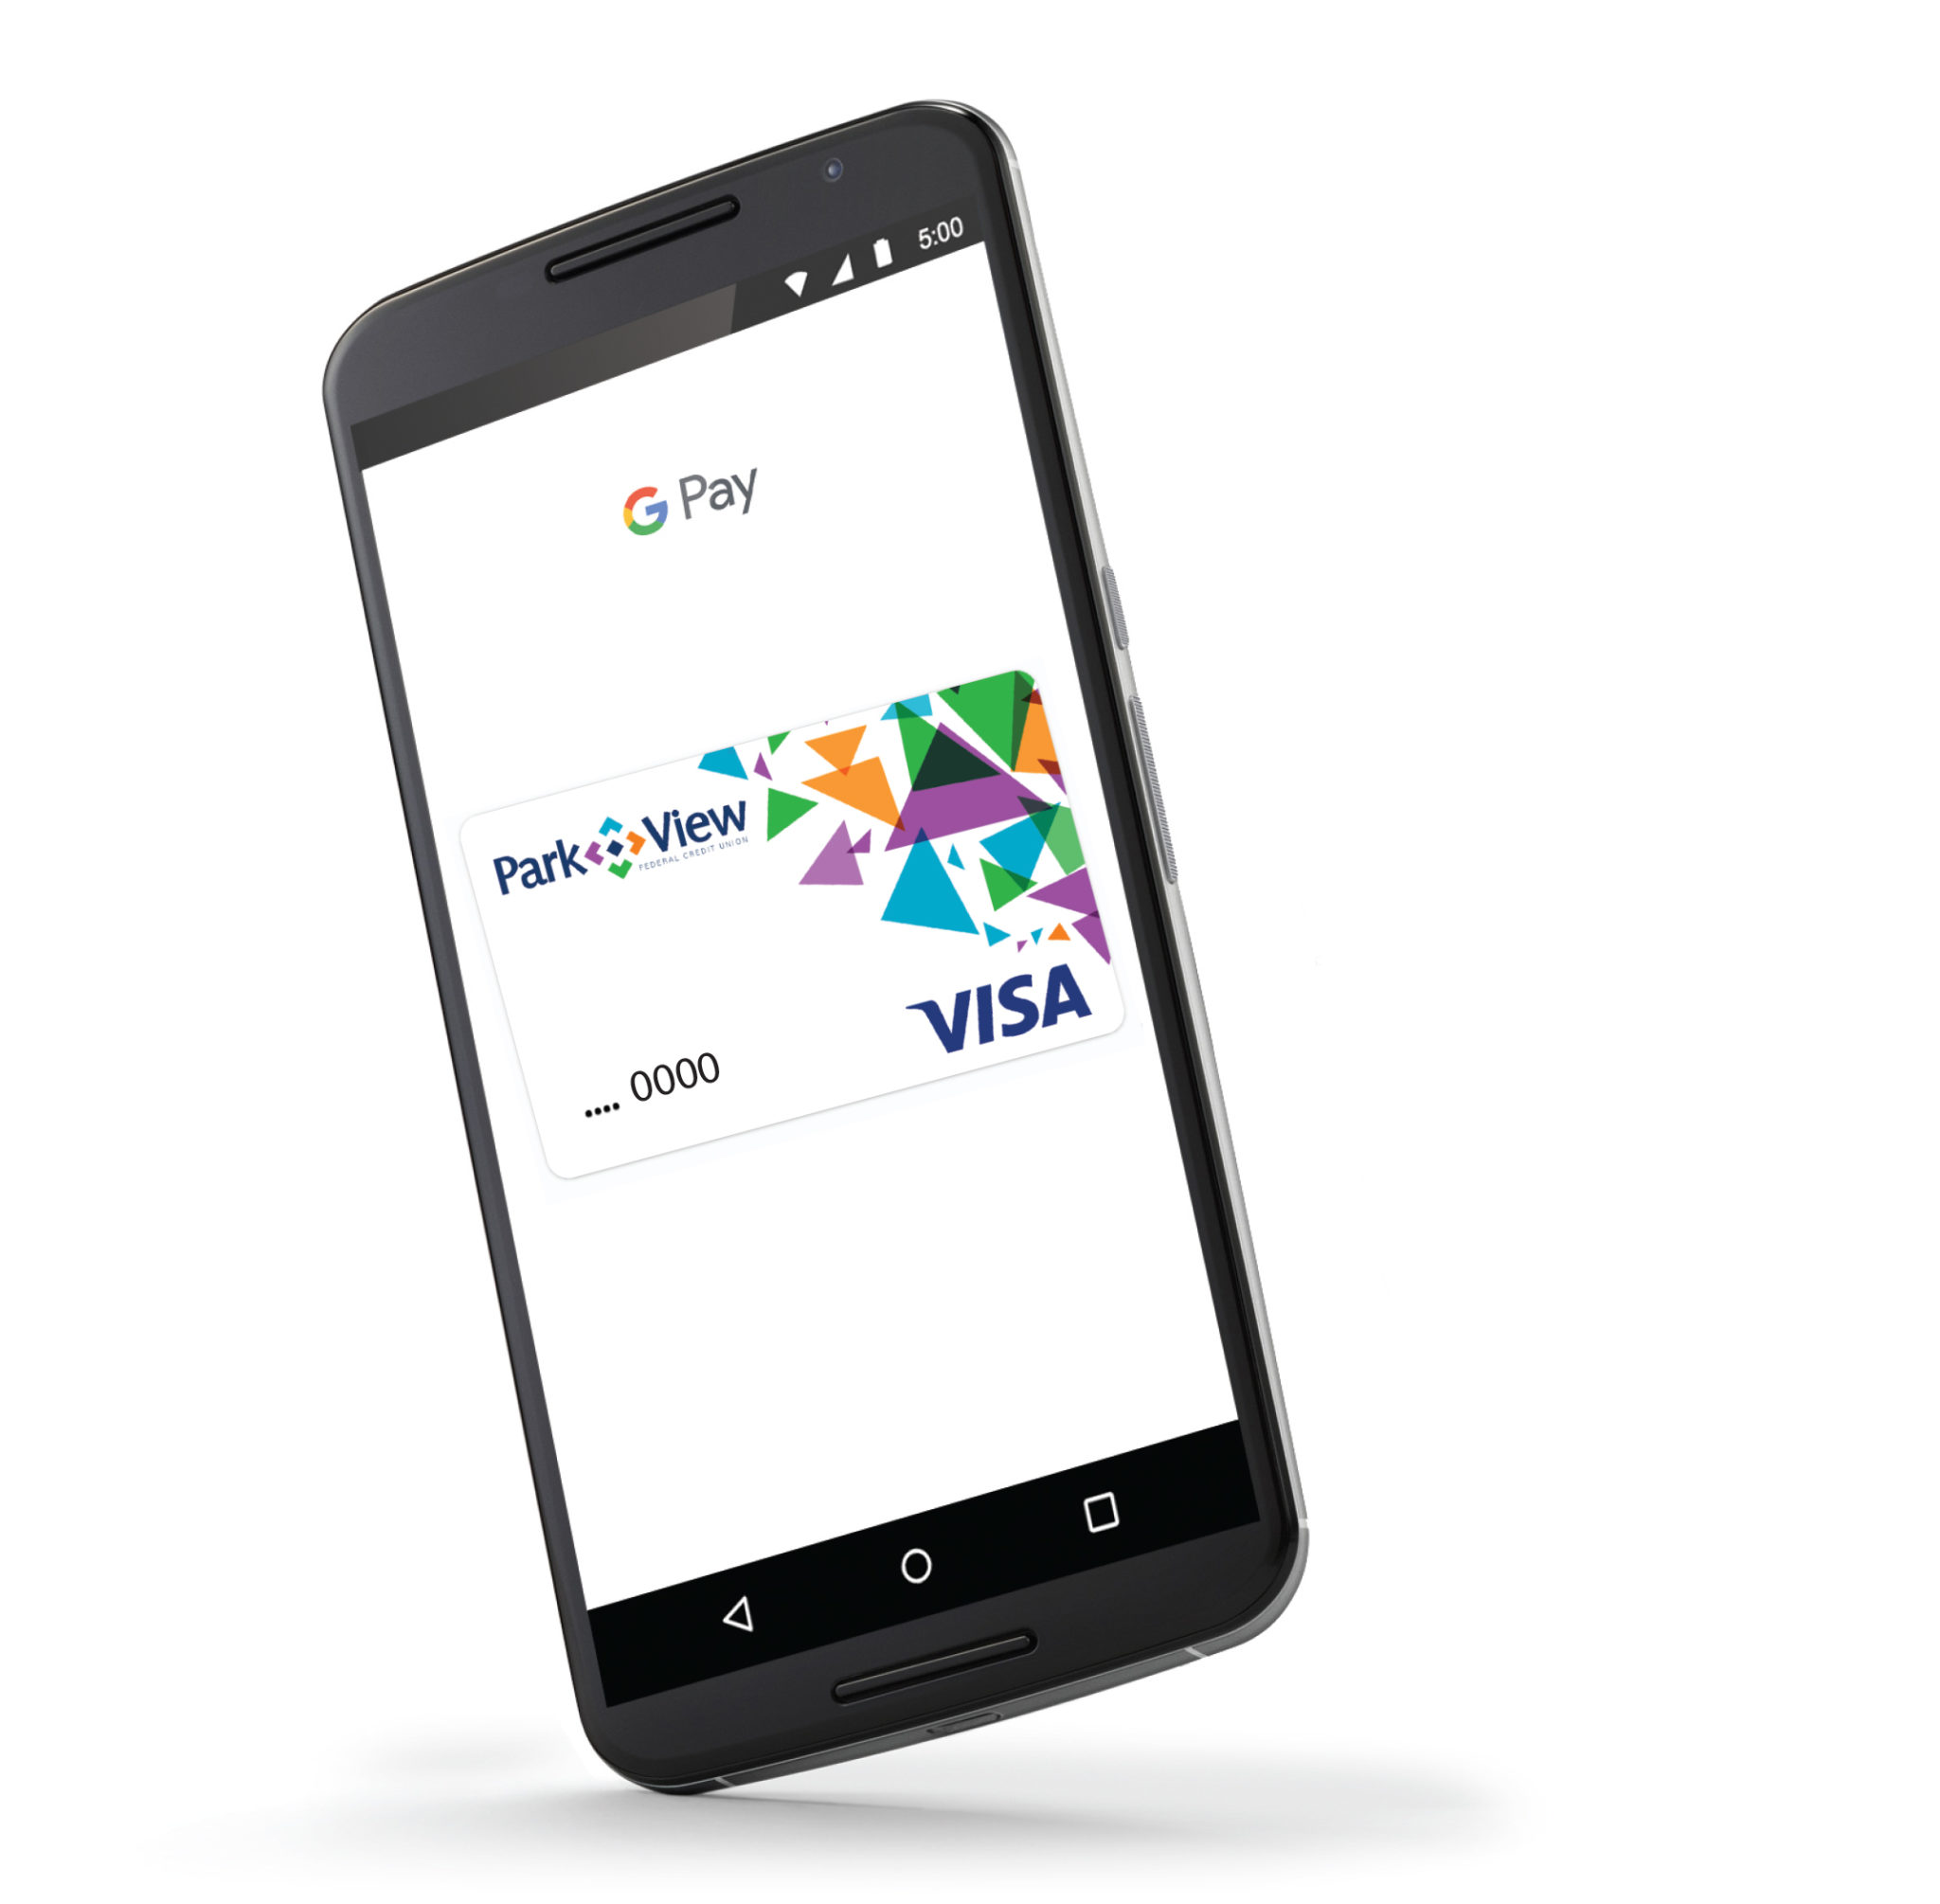 Google Pay image on a smartphone